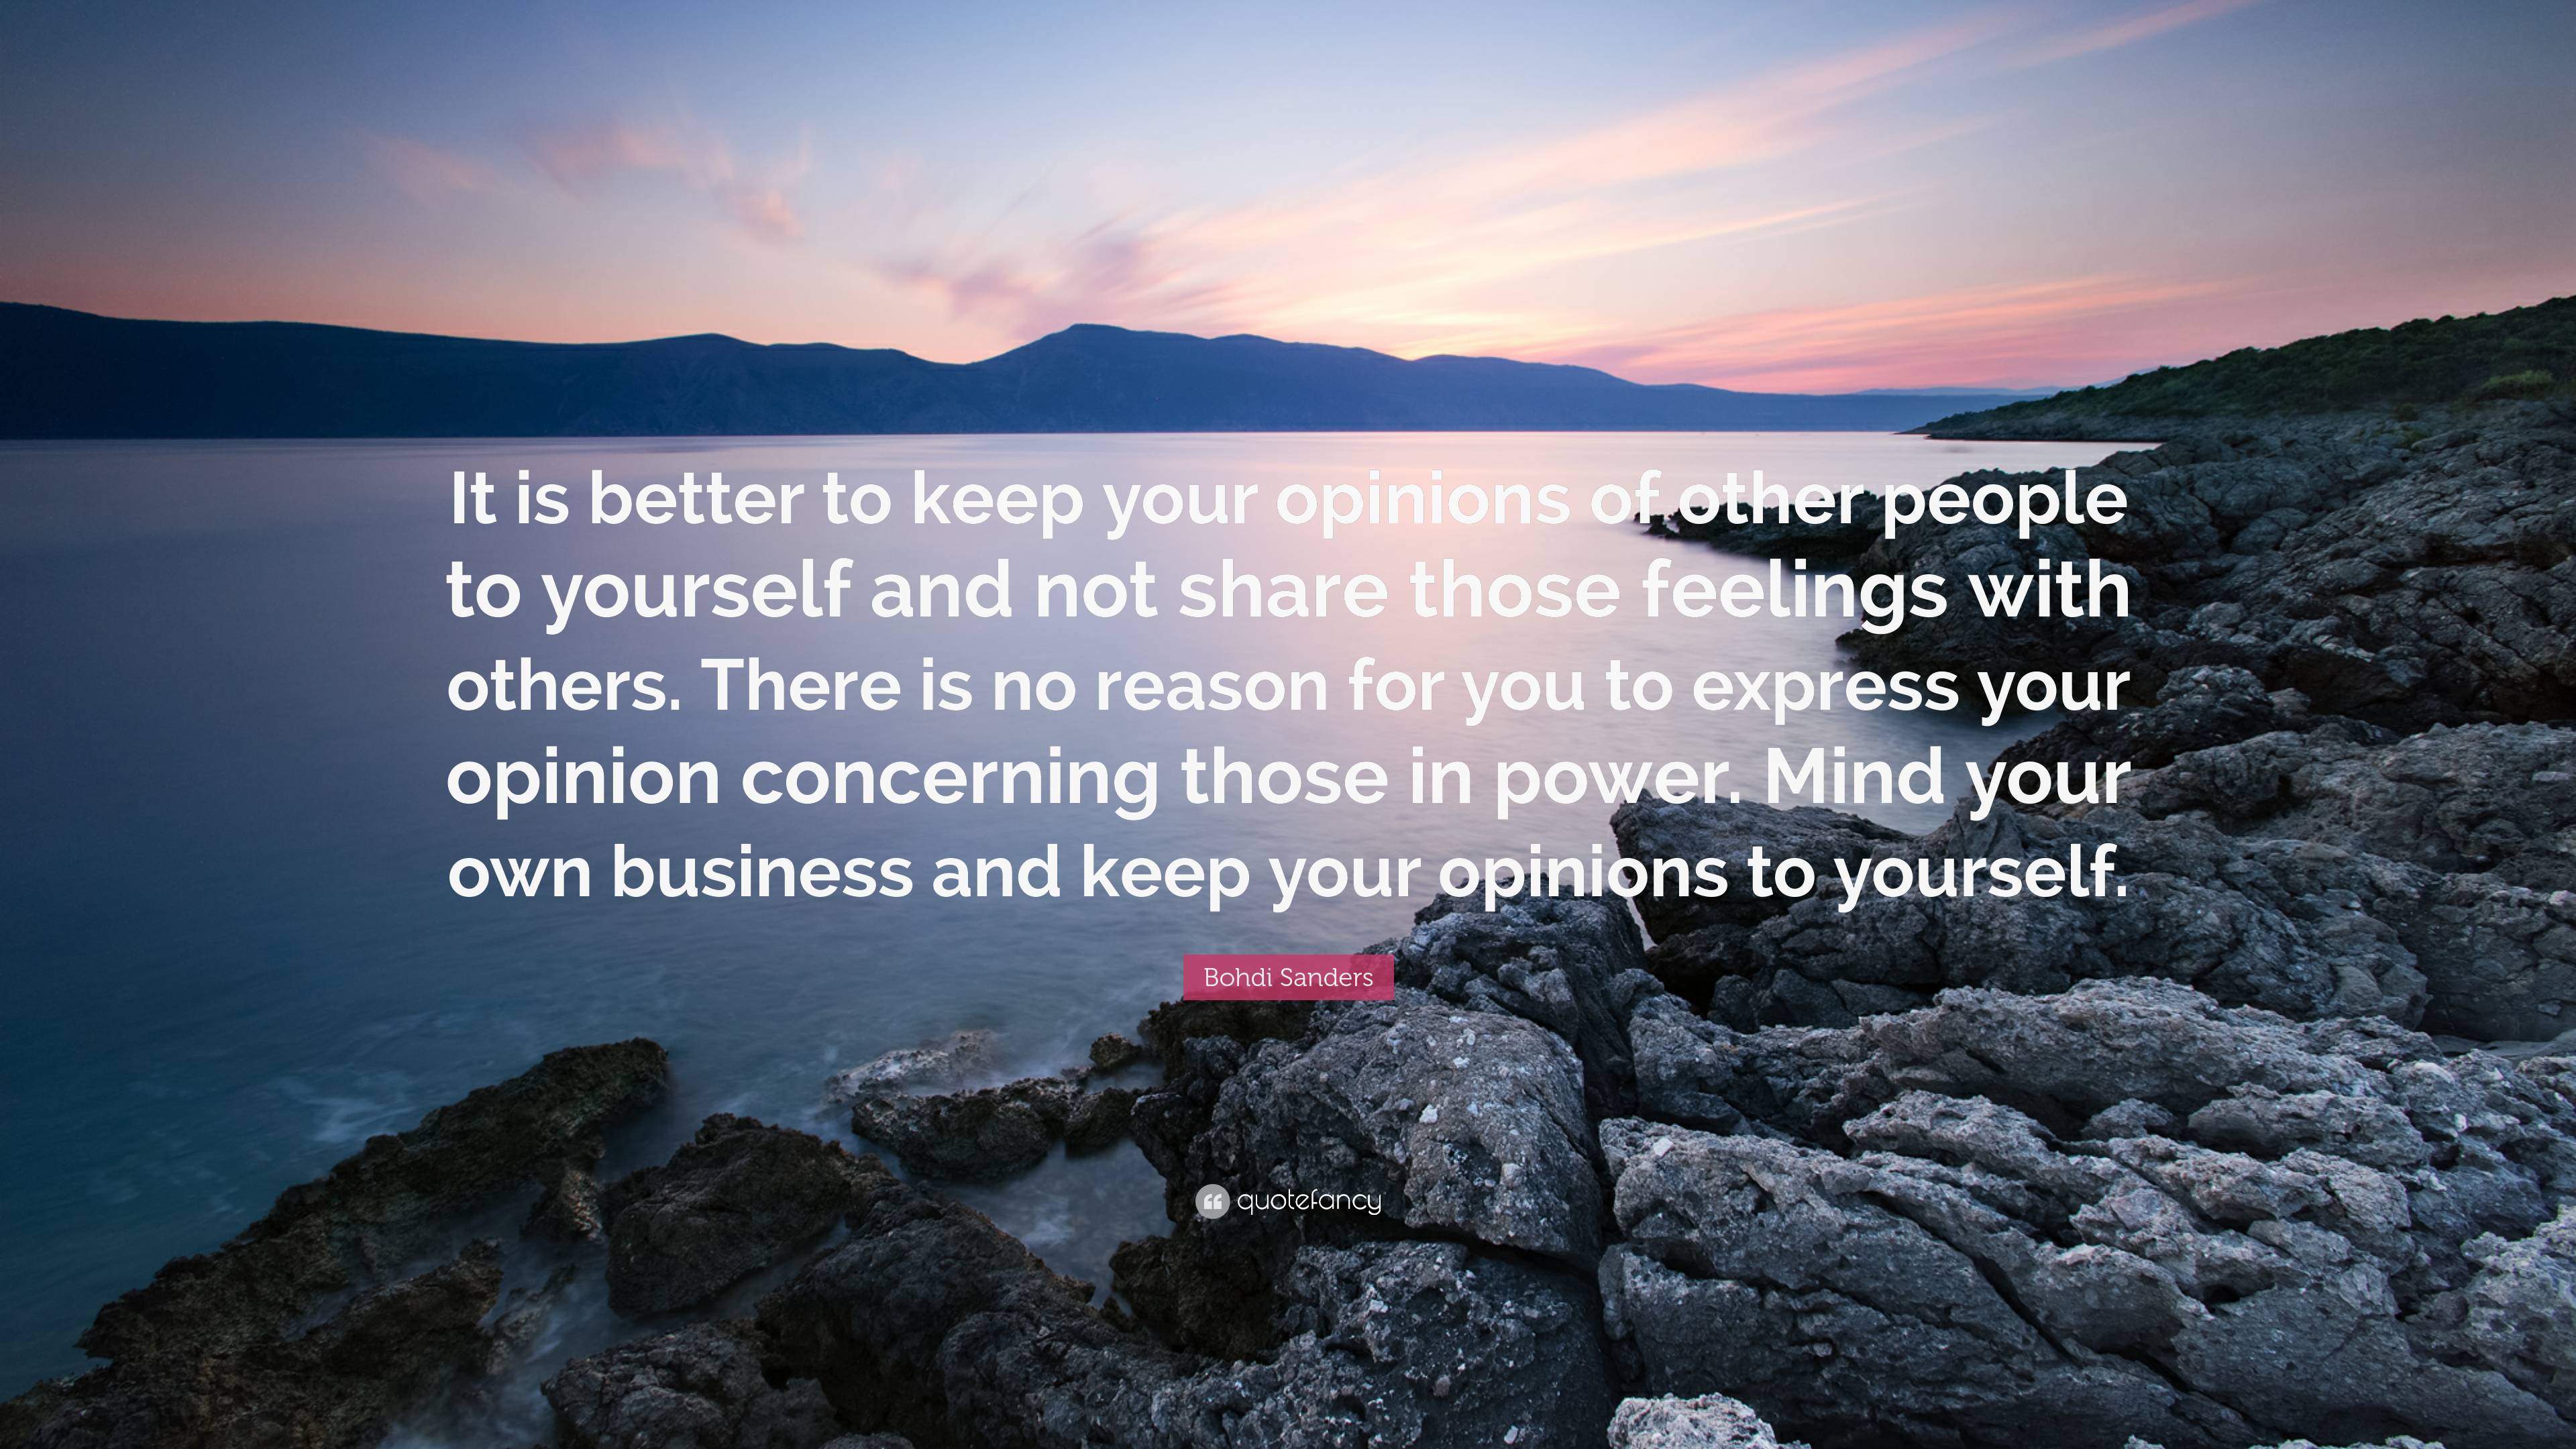 Bohdi Sanders Quote “it Is Better To Keep Your Opinions Of Other People To Yourself And Not